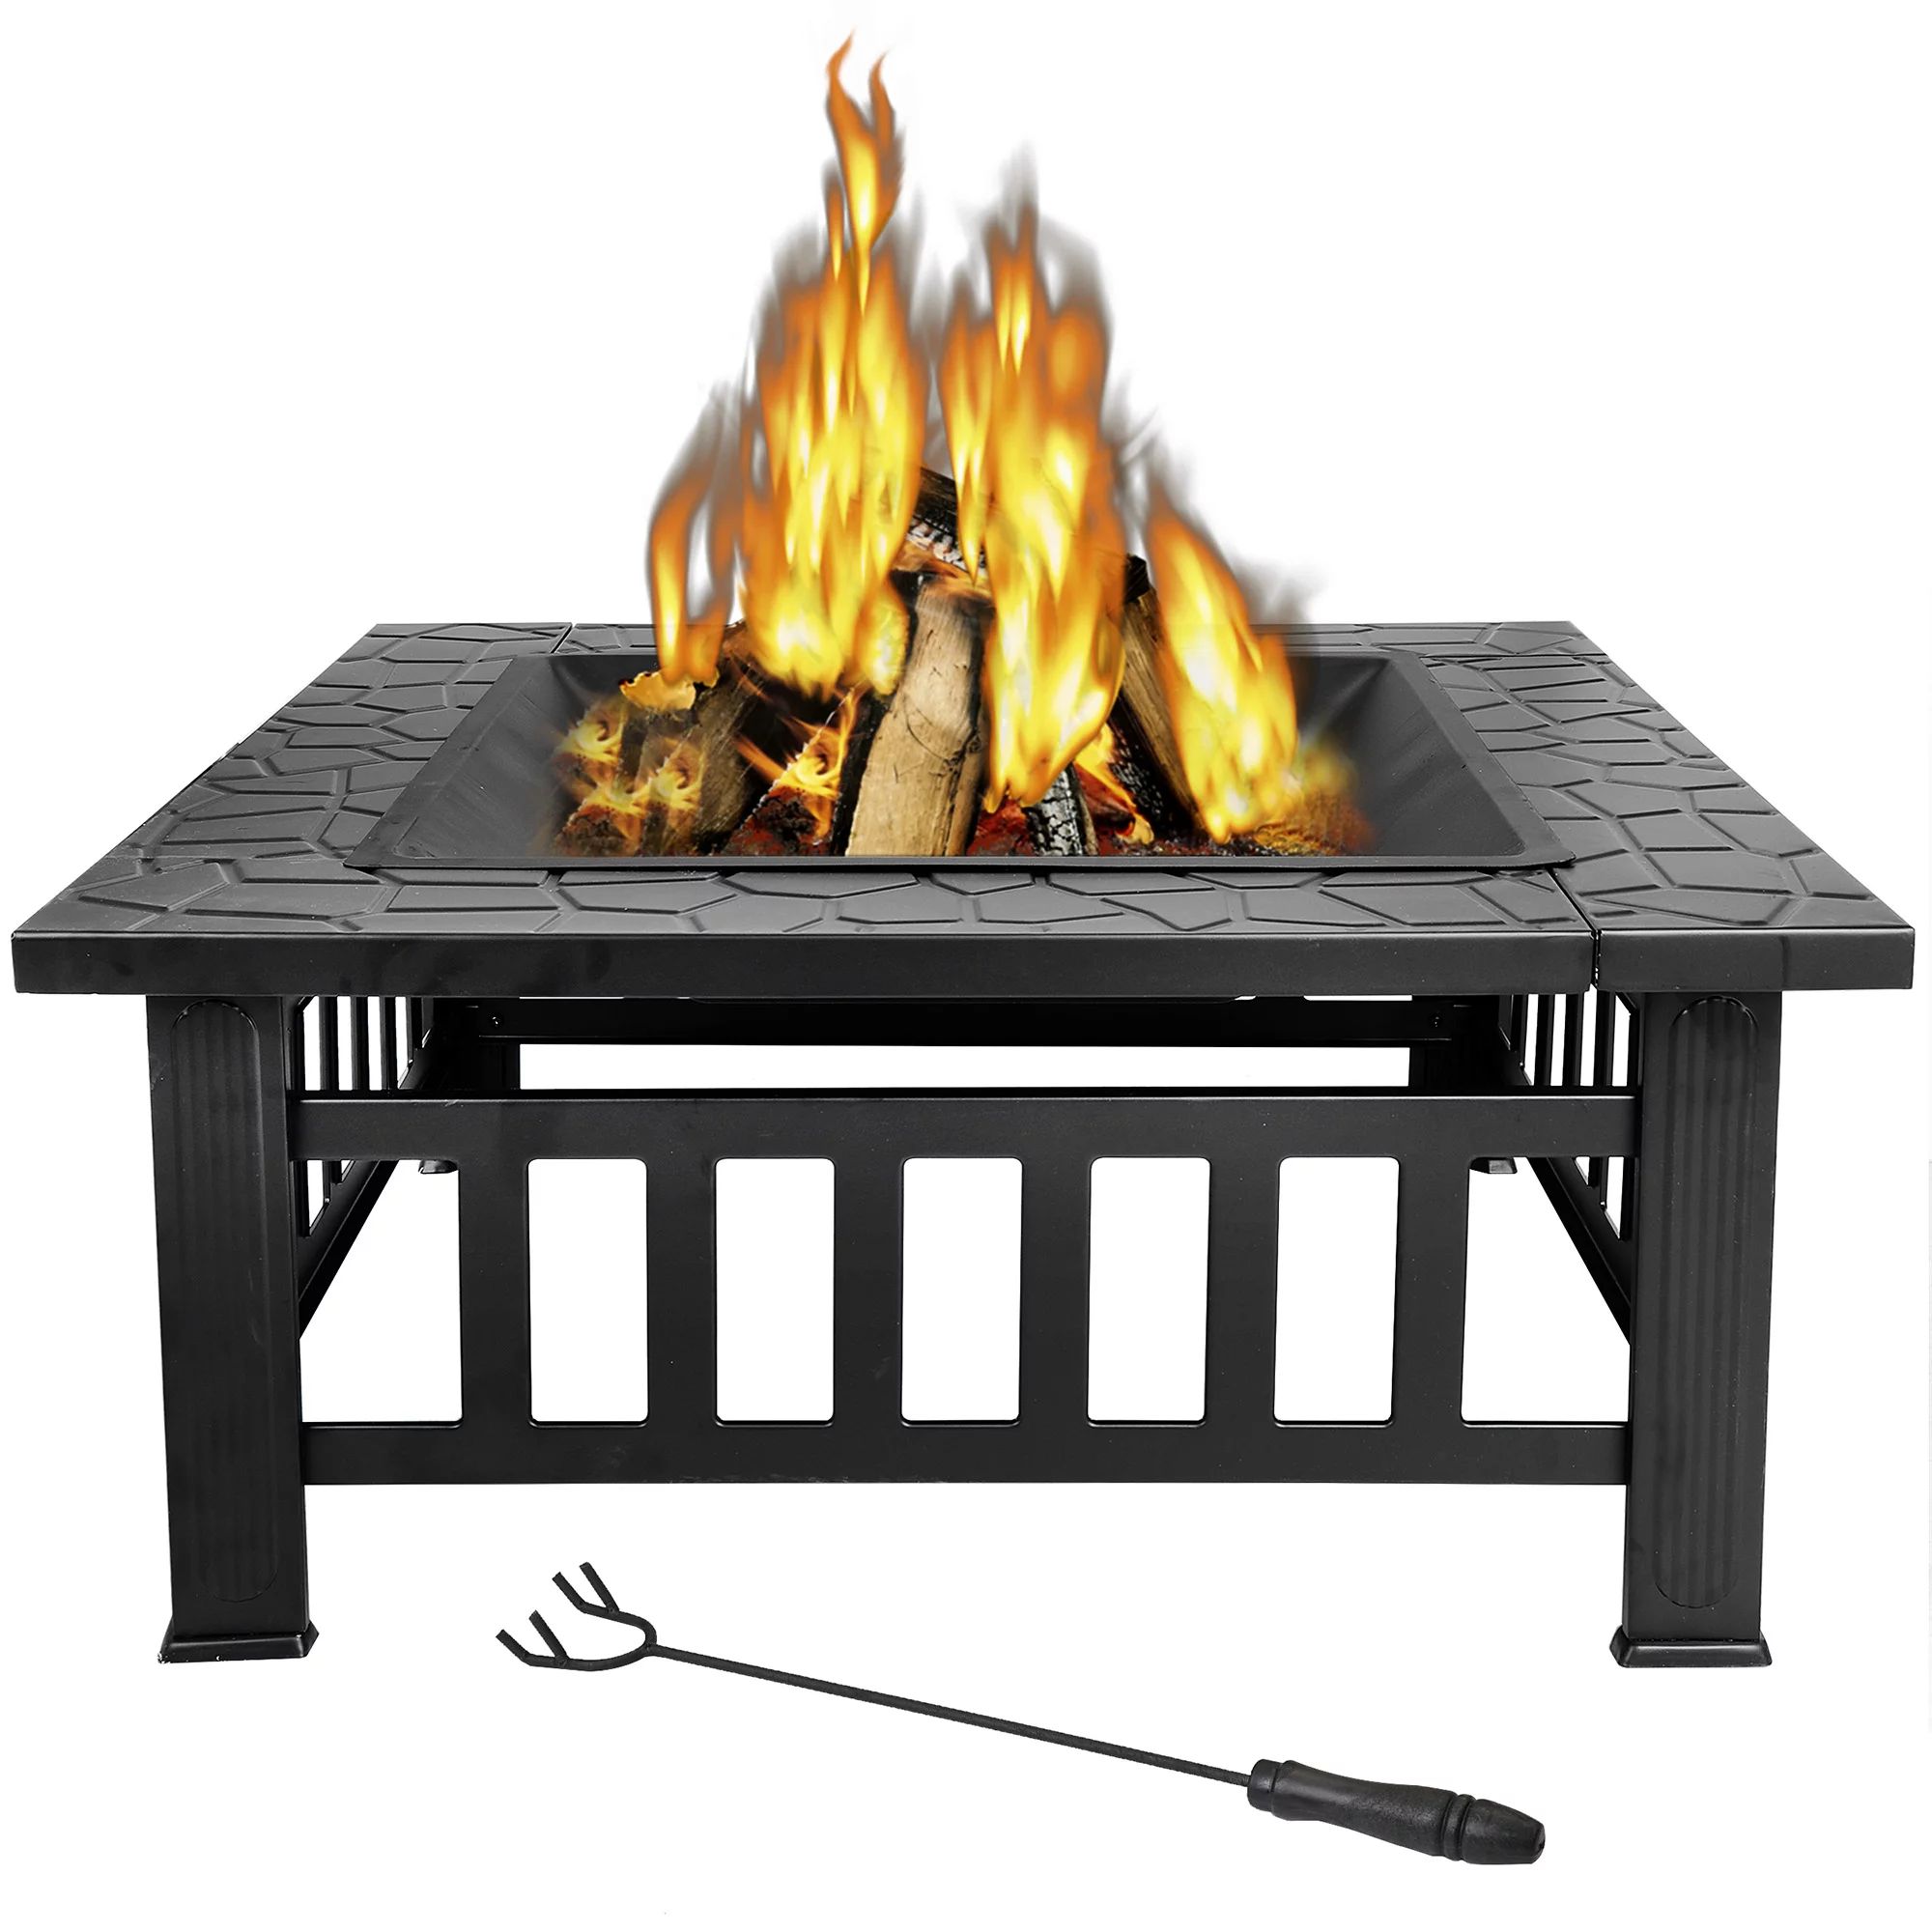 ZENSTYLE 32" Steel Fire Pit - Outdoor Backyard Barbecue and Winter warming Fireplace W/Rain Cover | Walmart (US)